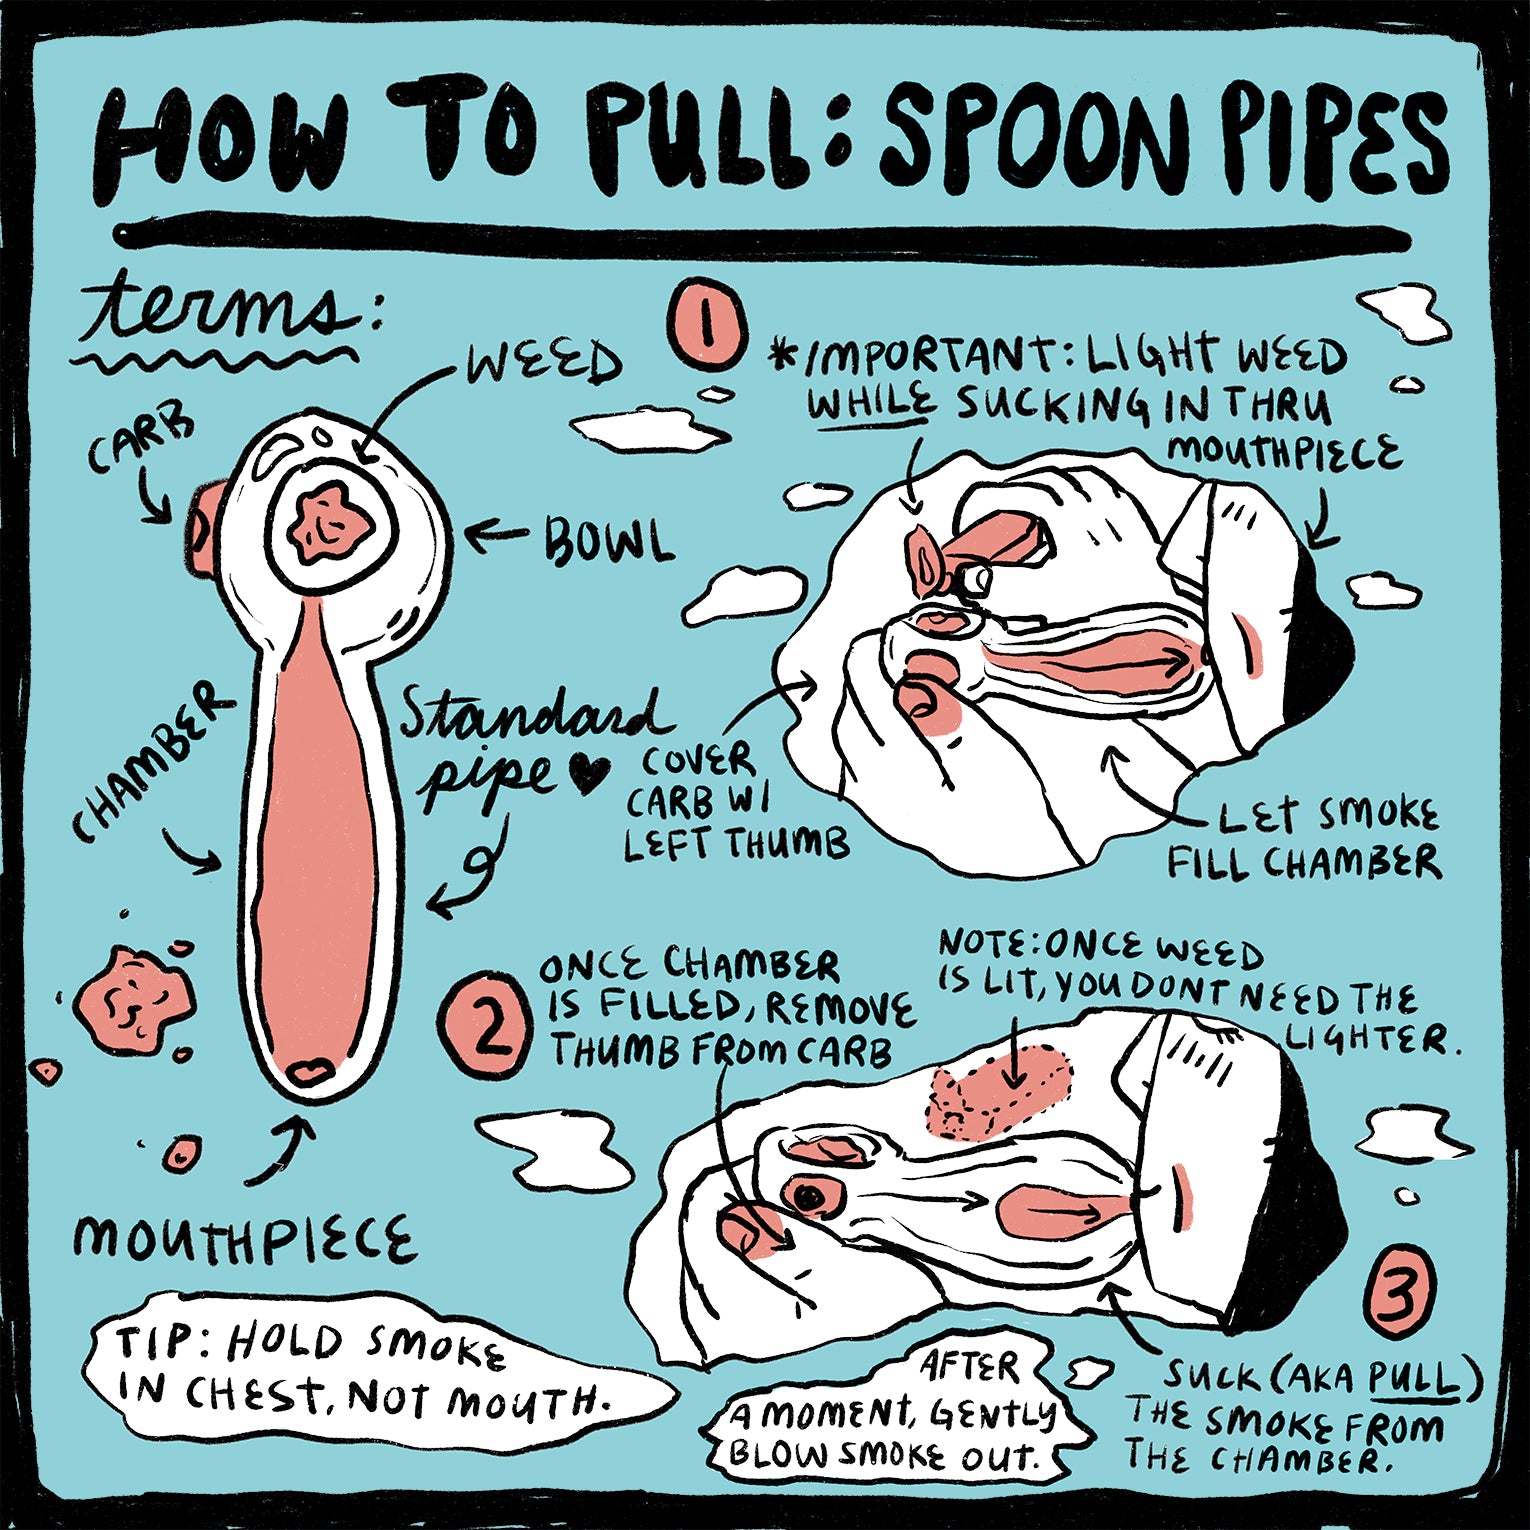 Auntie Luke's Stoner Guide, How to Pull: Spoon Pipes